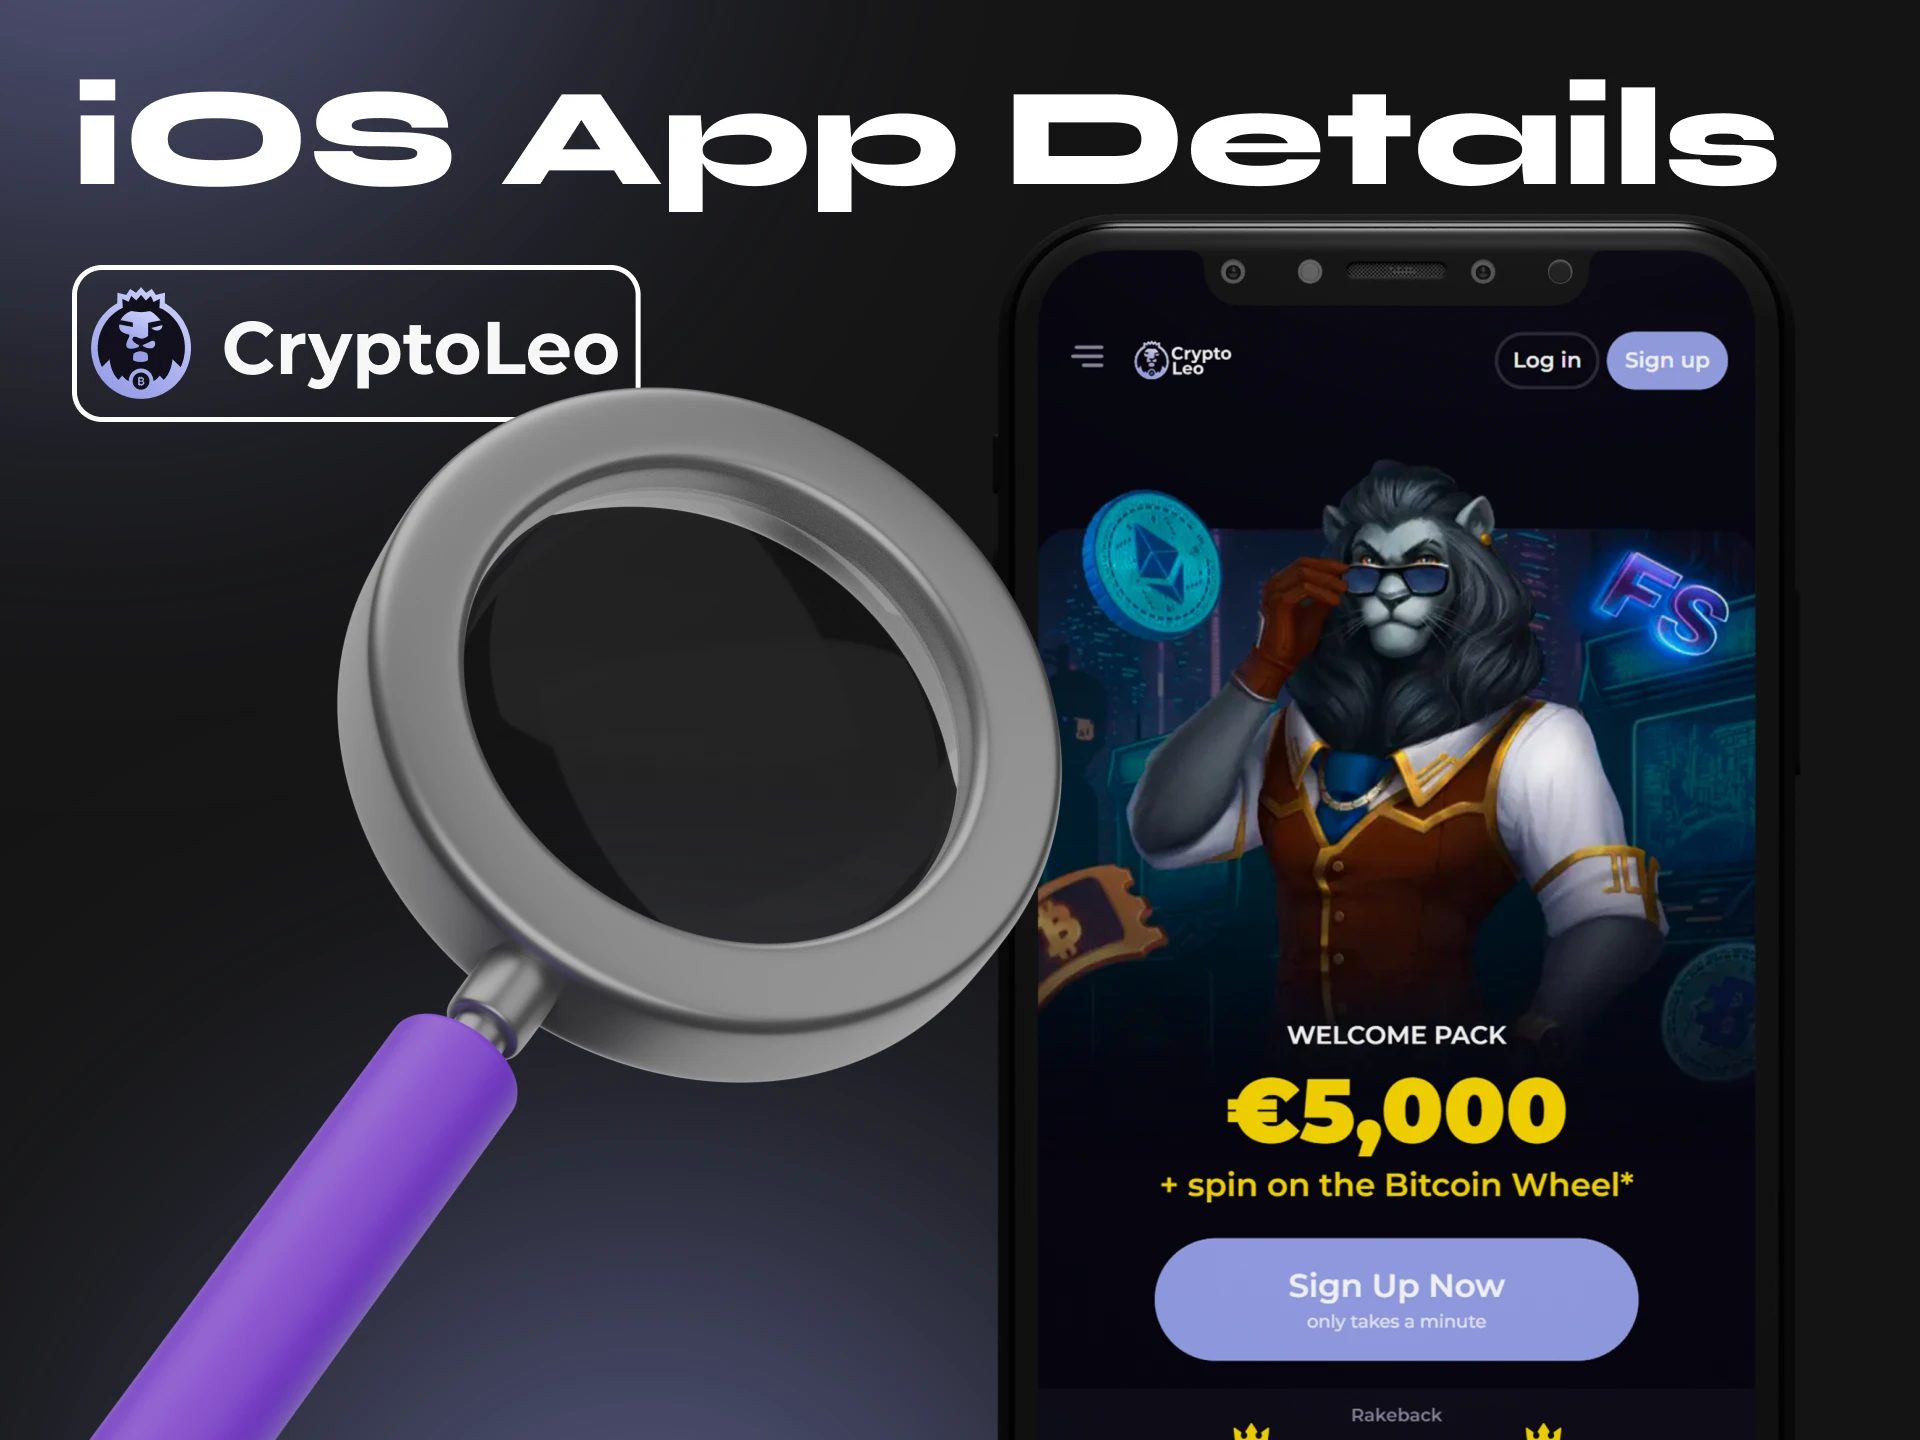 Use the Cryptoleo mobile site on iOS instead of the app.